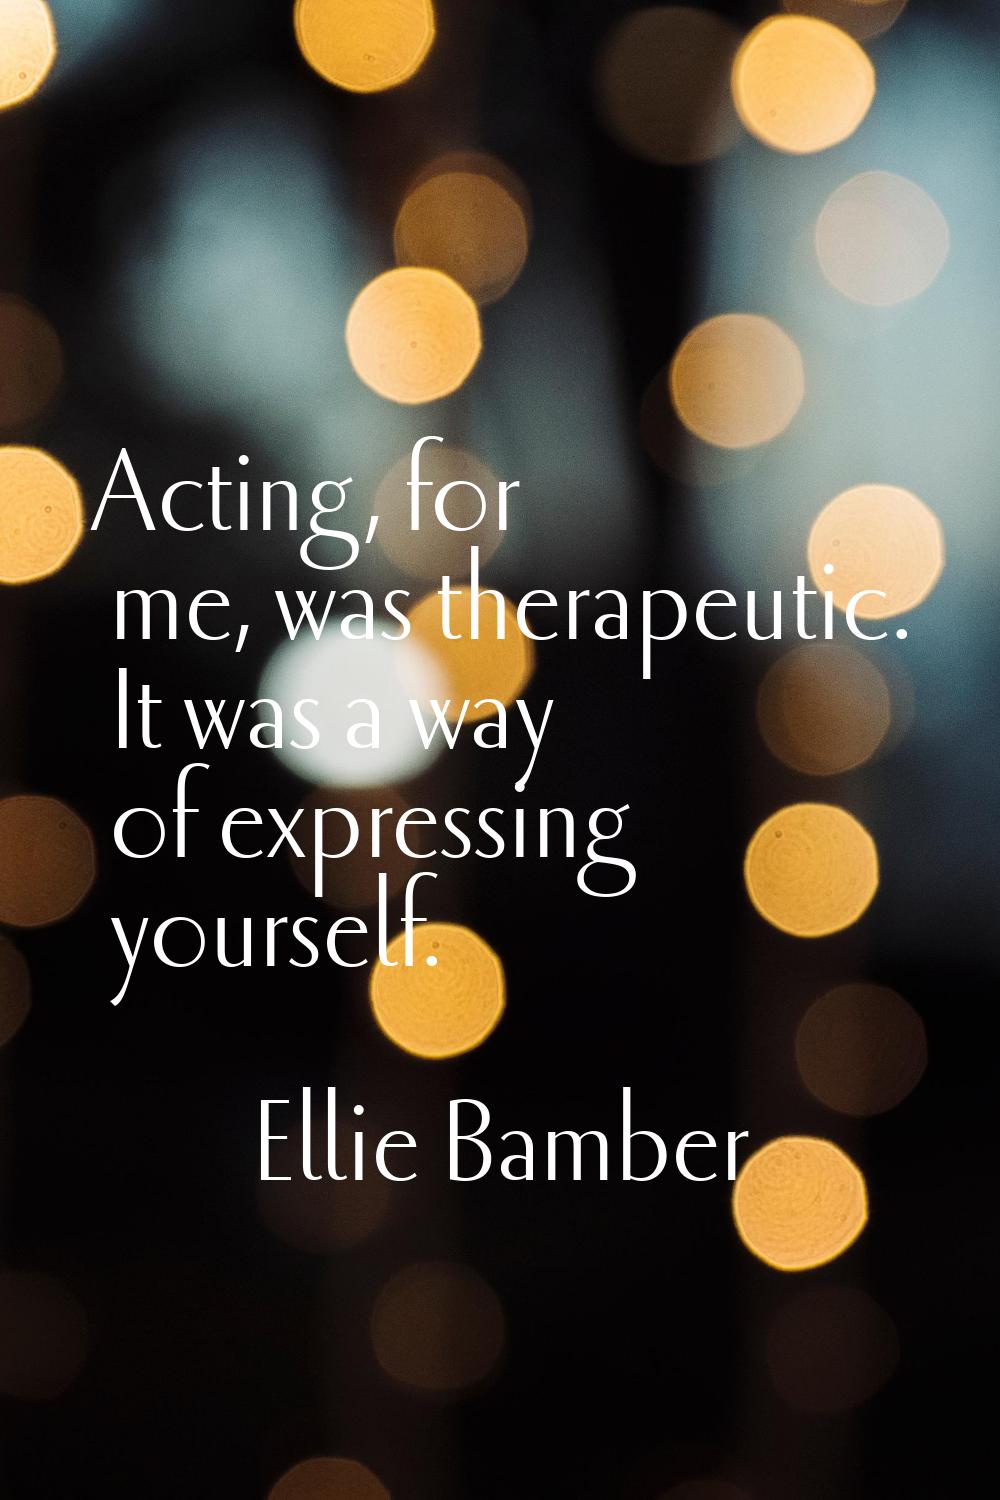 Acting, for me, was therapeutic. It was a way of expressing yourself.